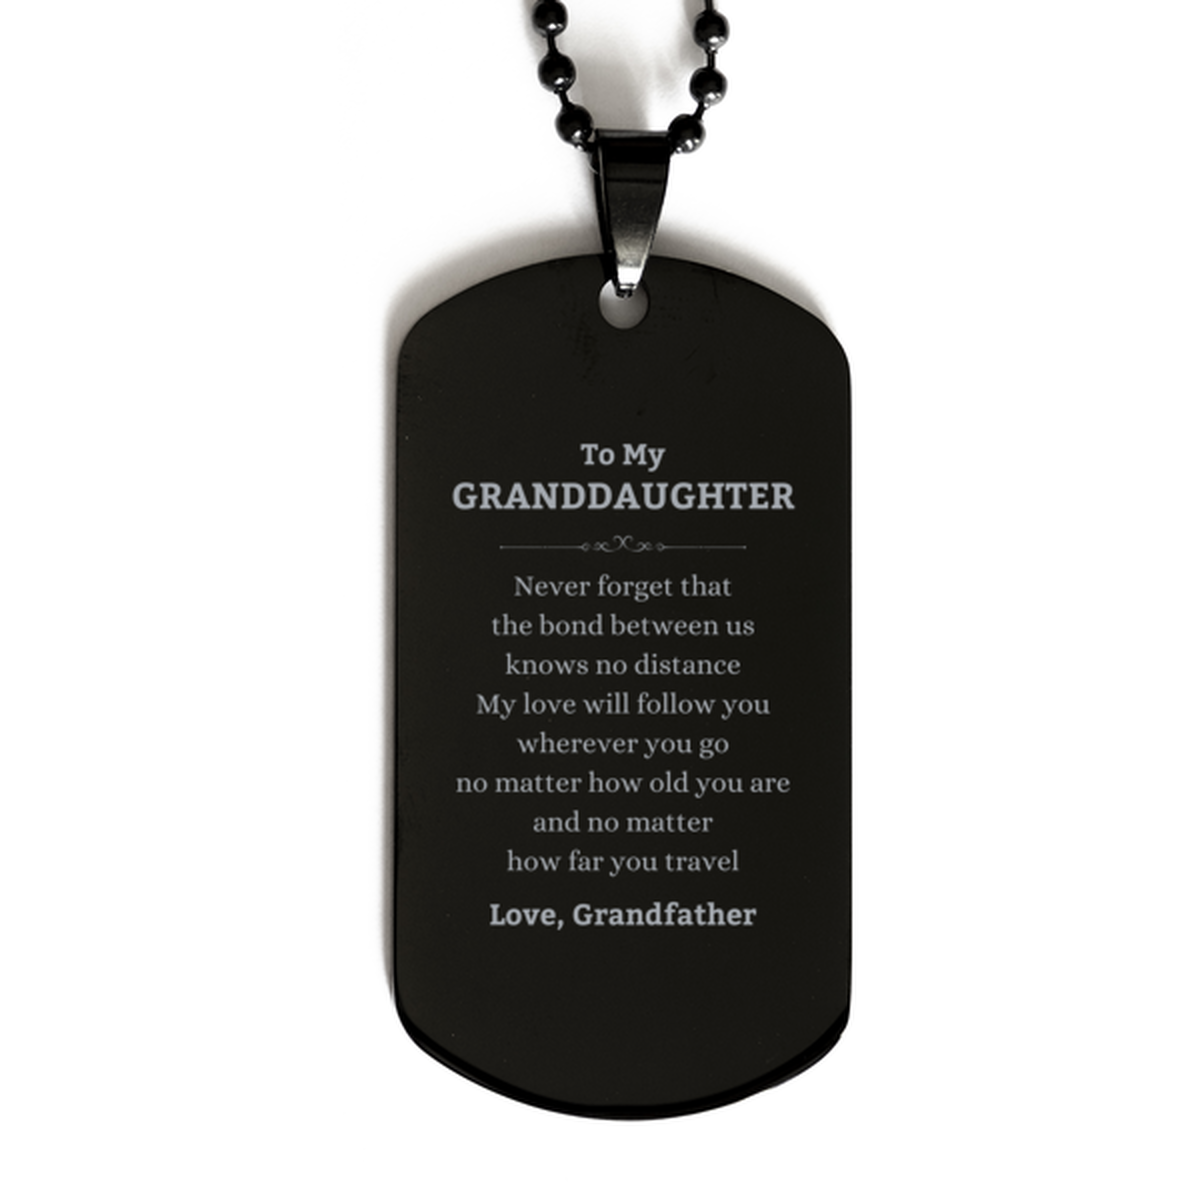 Granddaughter Birthday Gifts from Grandfather, Adjustable Black Dog Tag for Granddaughter Christmas Graduation Unique Gifts Granddaughter Never forget that the bond between us knows no distance. Love, Grandfather